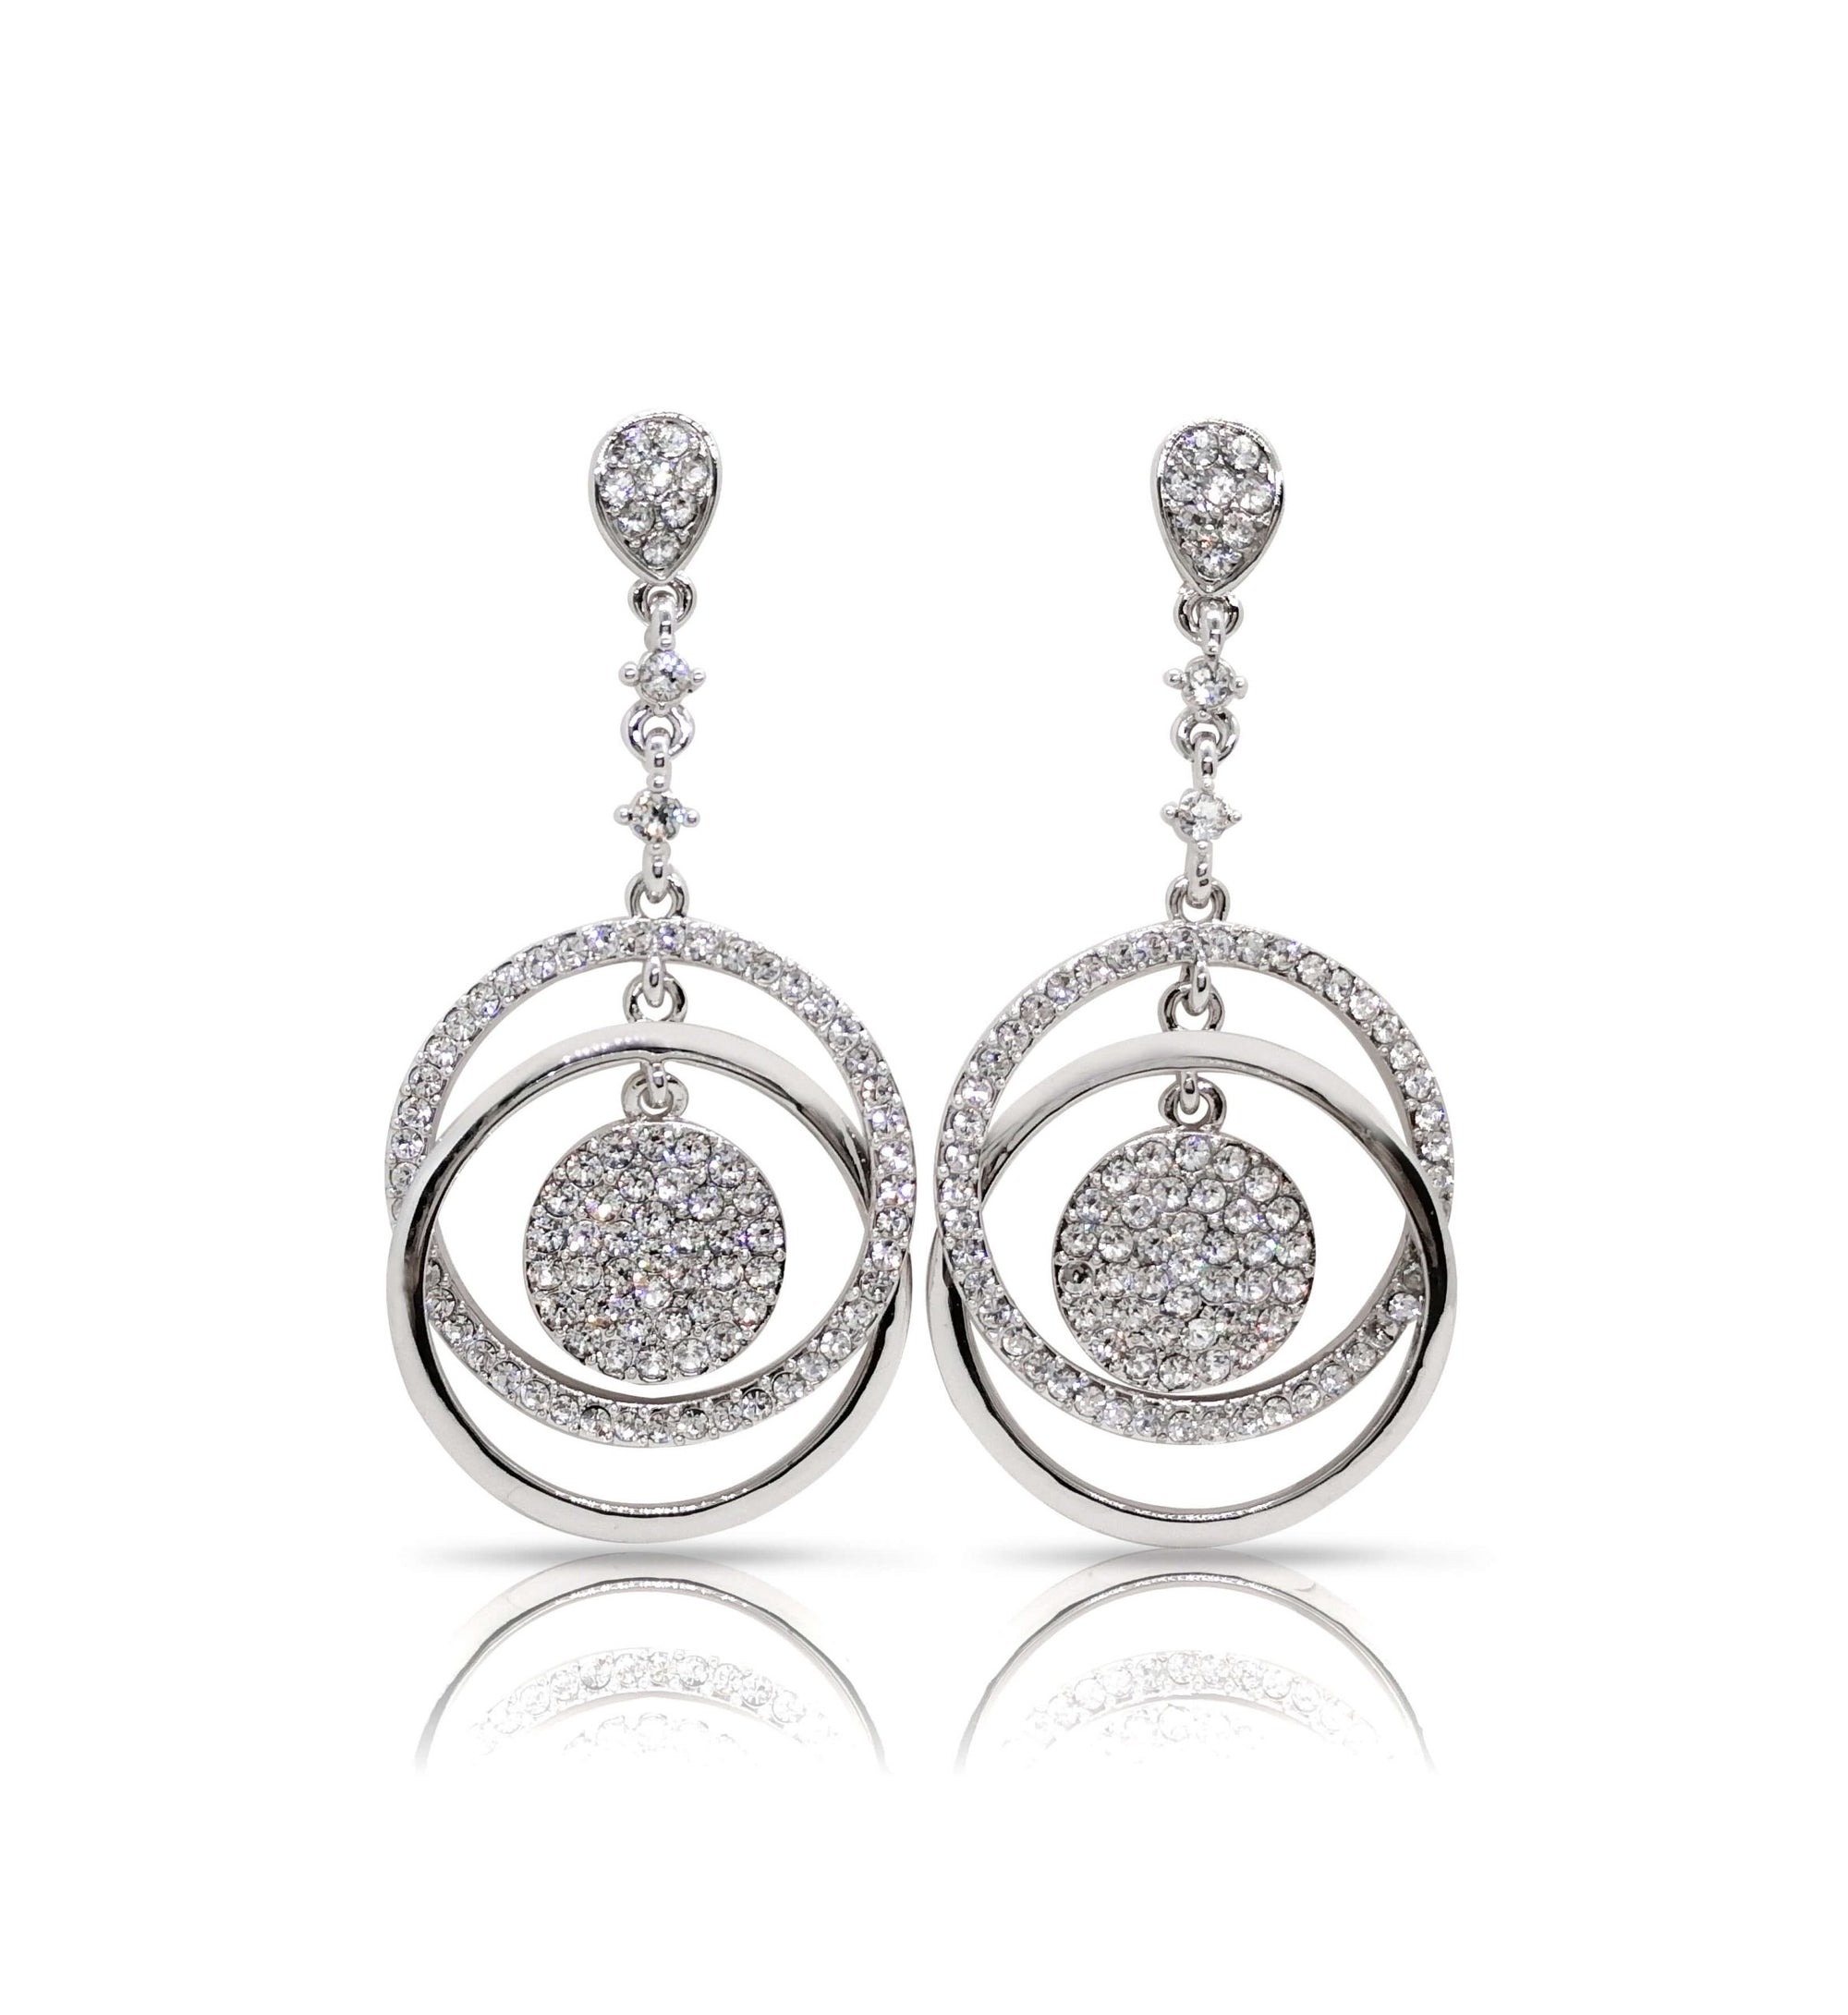 Union white gold plated Earrings with Fifth Element crystals (ER 003)